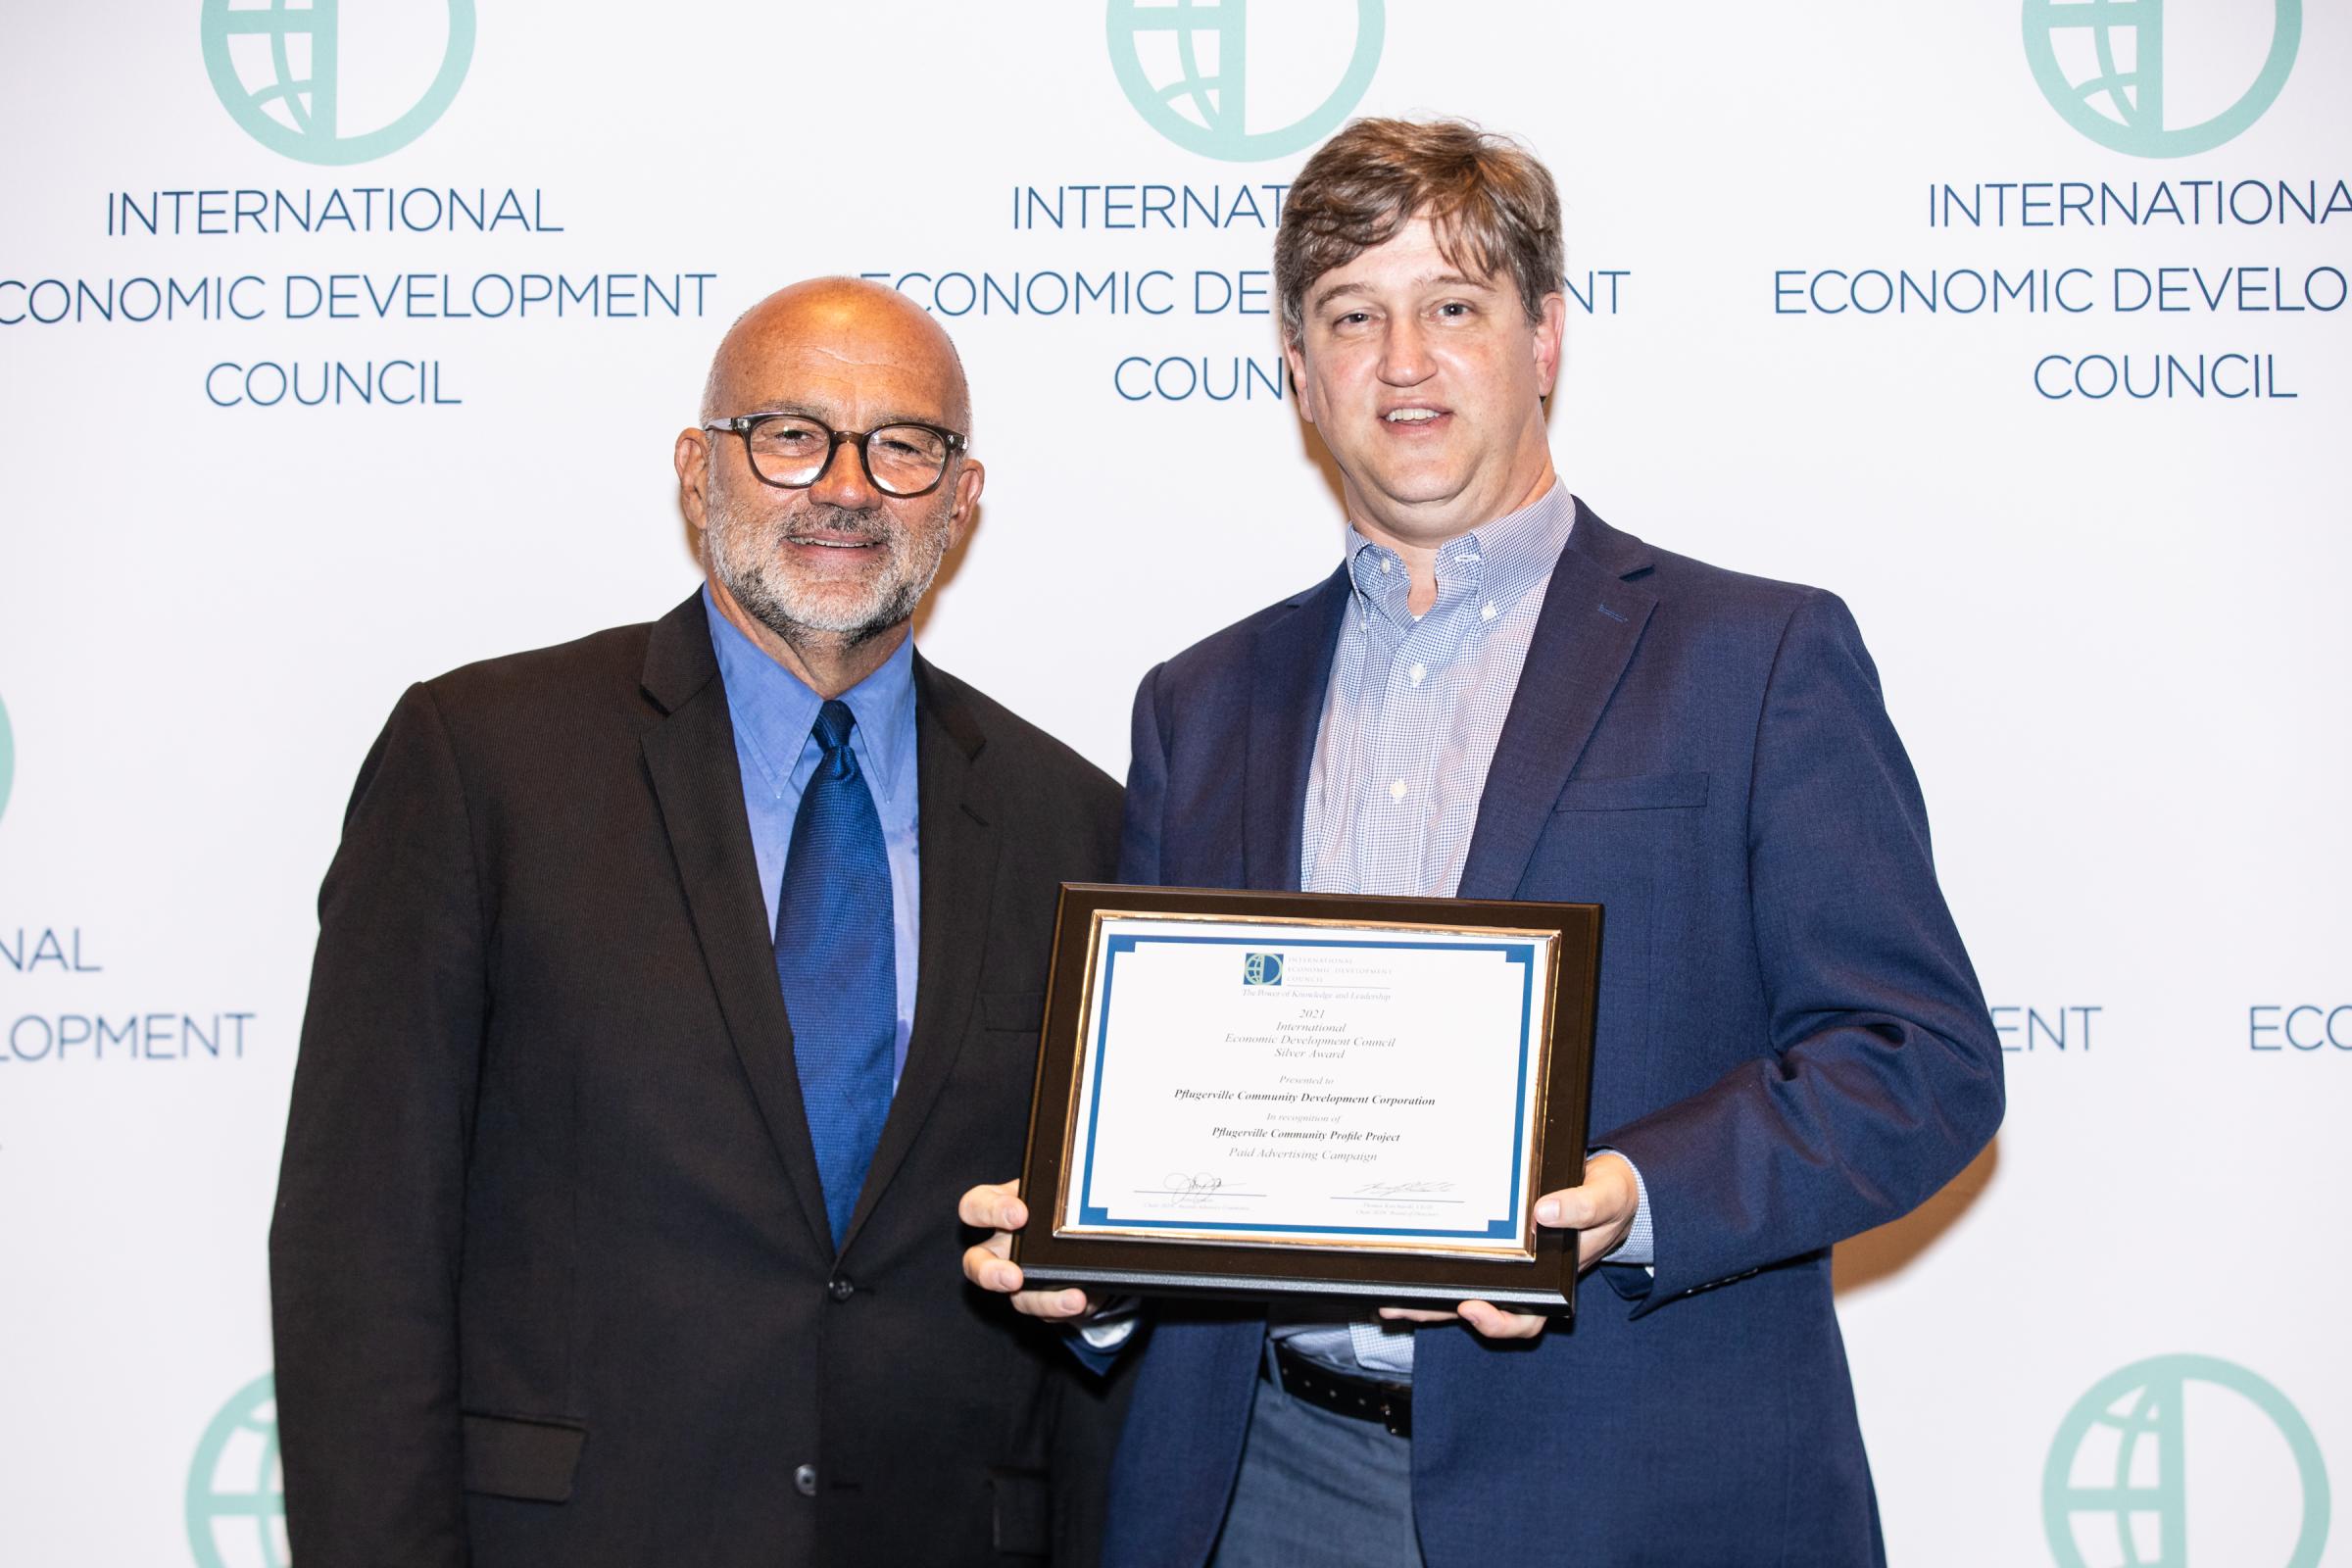 PFLUGERVILLE COMMUNITY DEVELOPMENT CORP. RECEIVES EXCELLENCE IN ECONOMIC DEVELOPMENT AWARD FROM THE INTERNATIONAL ECONOMIC DEVELOPMENT COUNCIL Photo